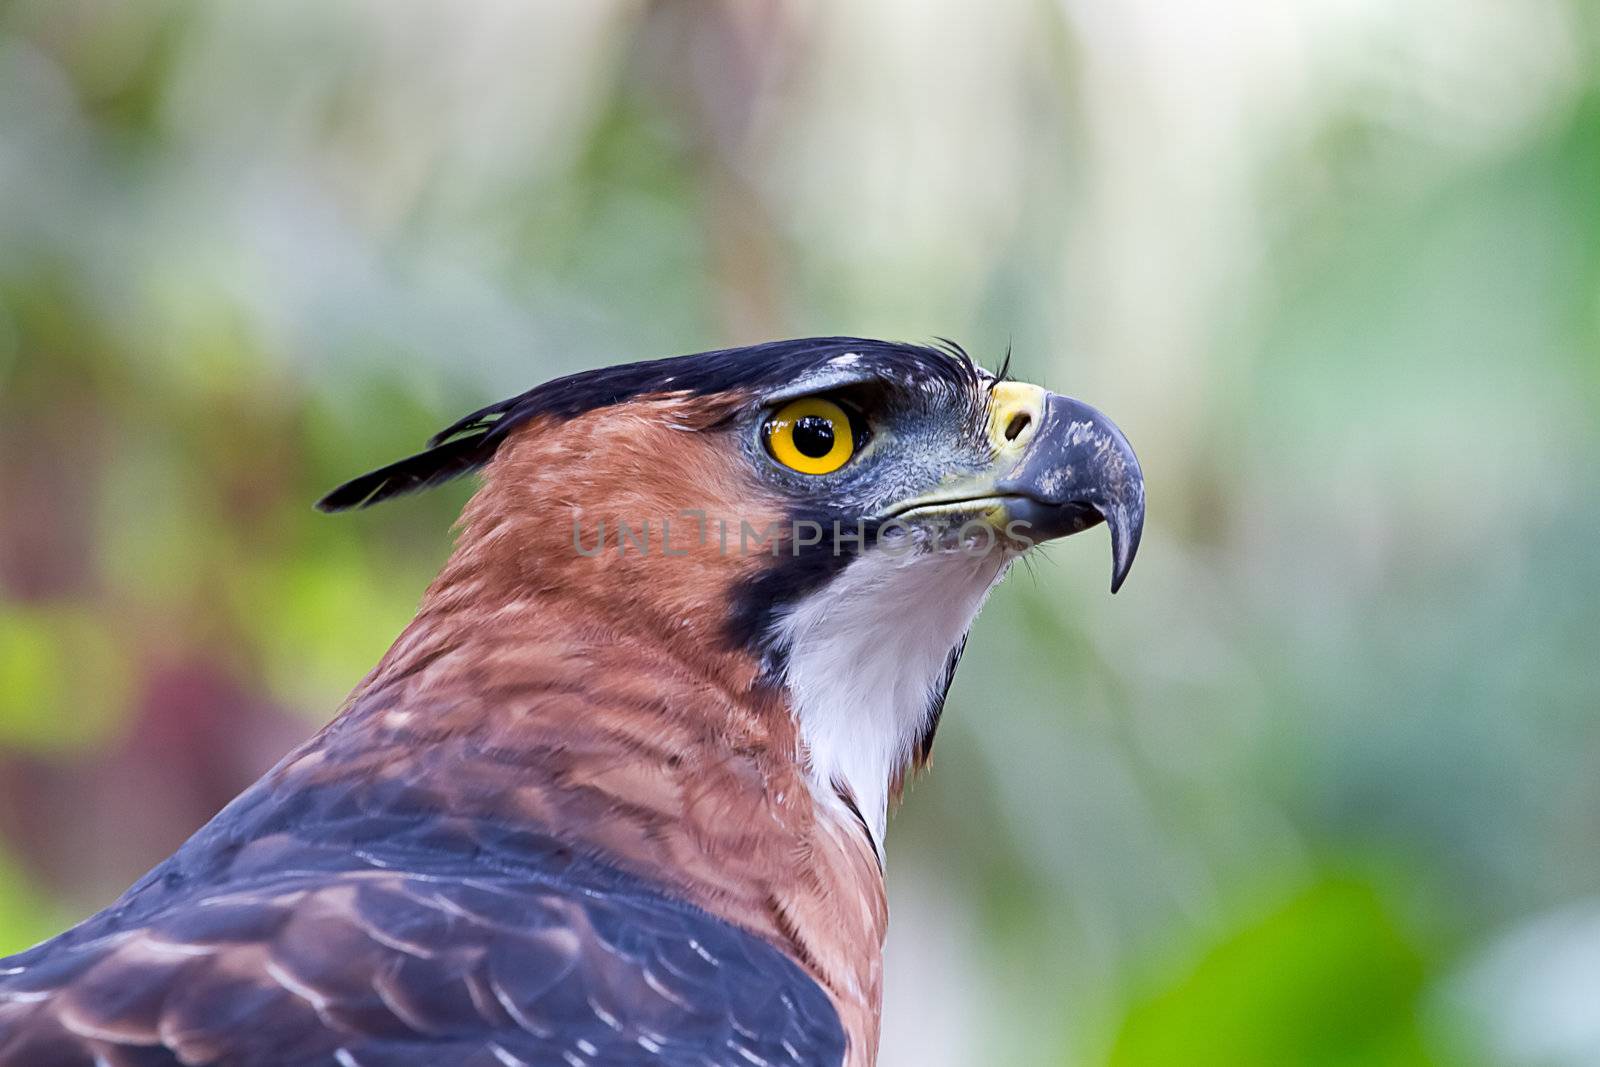 Close up of an Ornate Hawk Eagle at rest in the Amazon jungle.